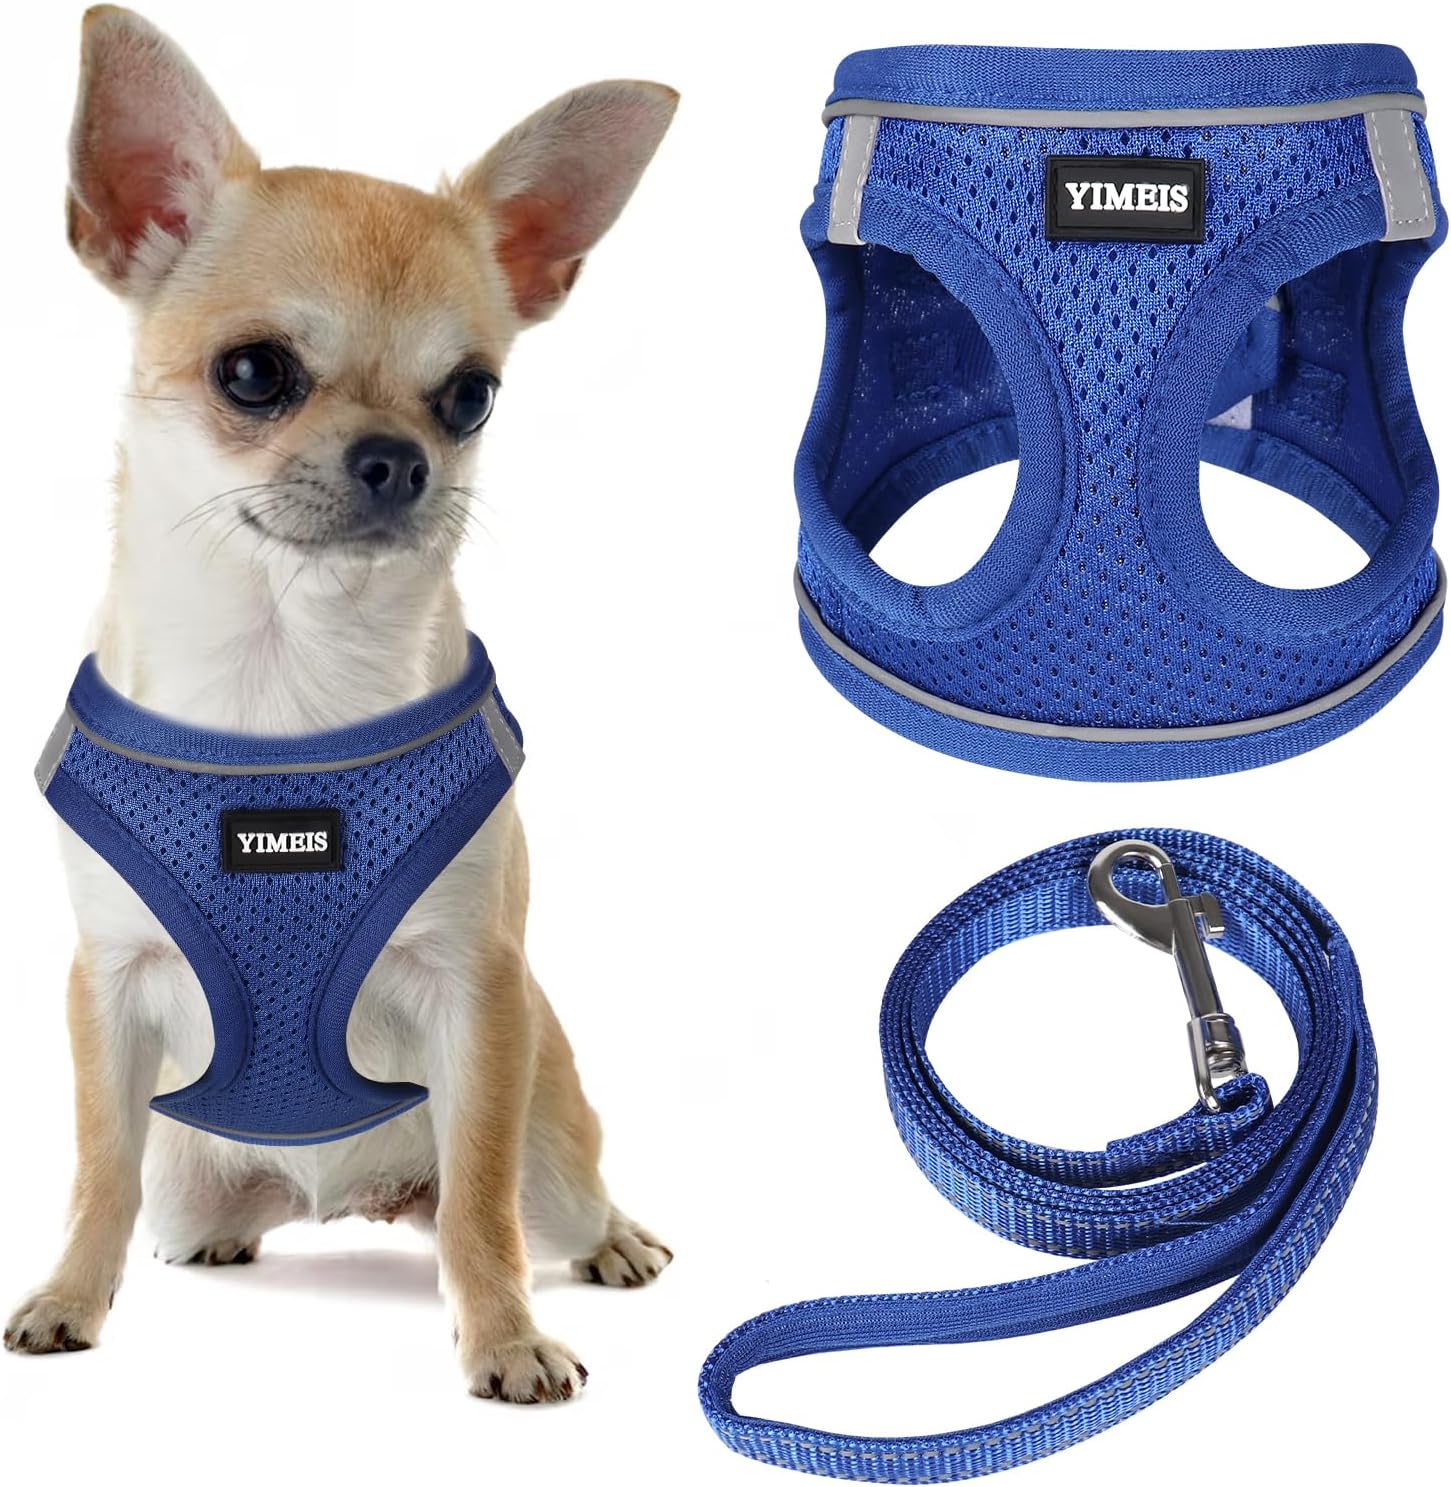 YIMEIS Dog Harness and Leash Set, No Pull Soft Mesh Pet Harness, Reflective Adjustable Puppy Vest for Small Medium Large Dogs, Cats (Royal Blue, Small (Pack of 1)